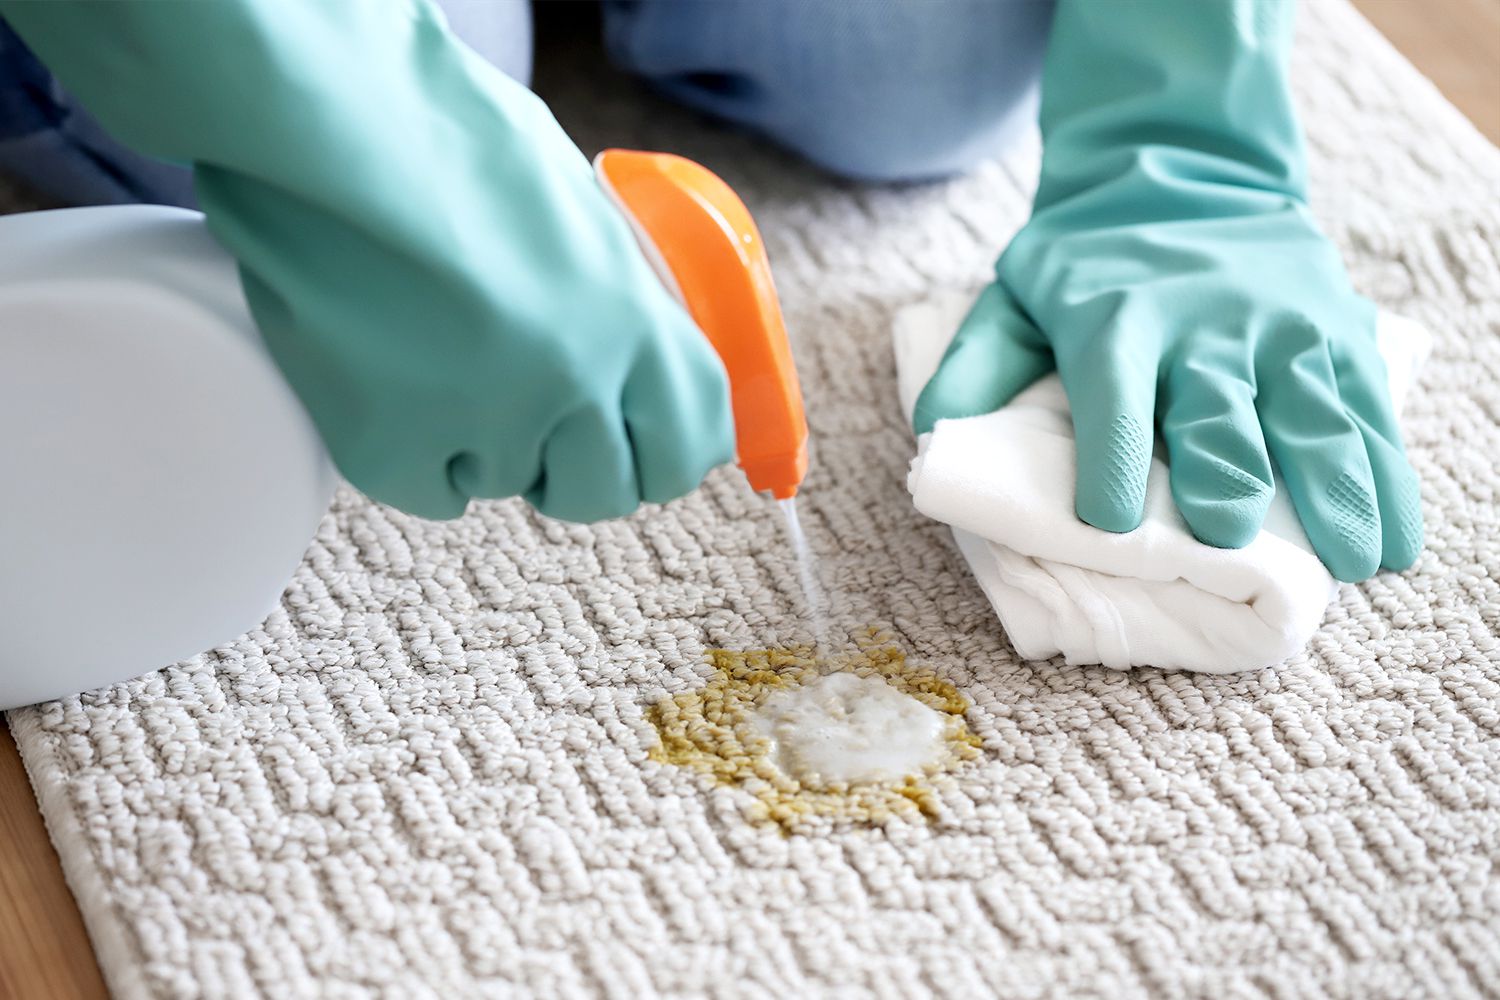 How to Remove Vomit Stains From Carpet